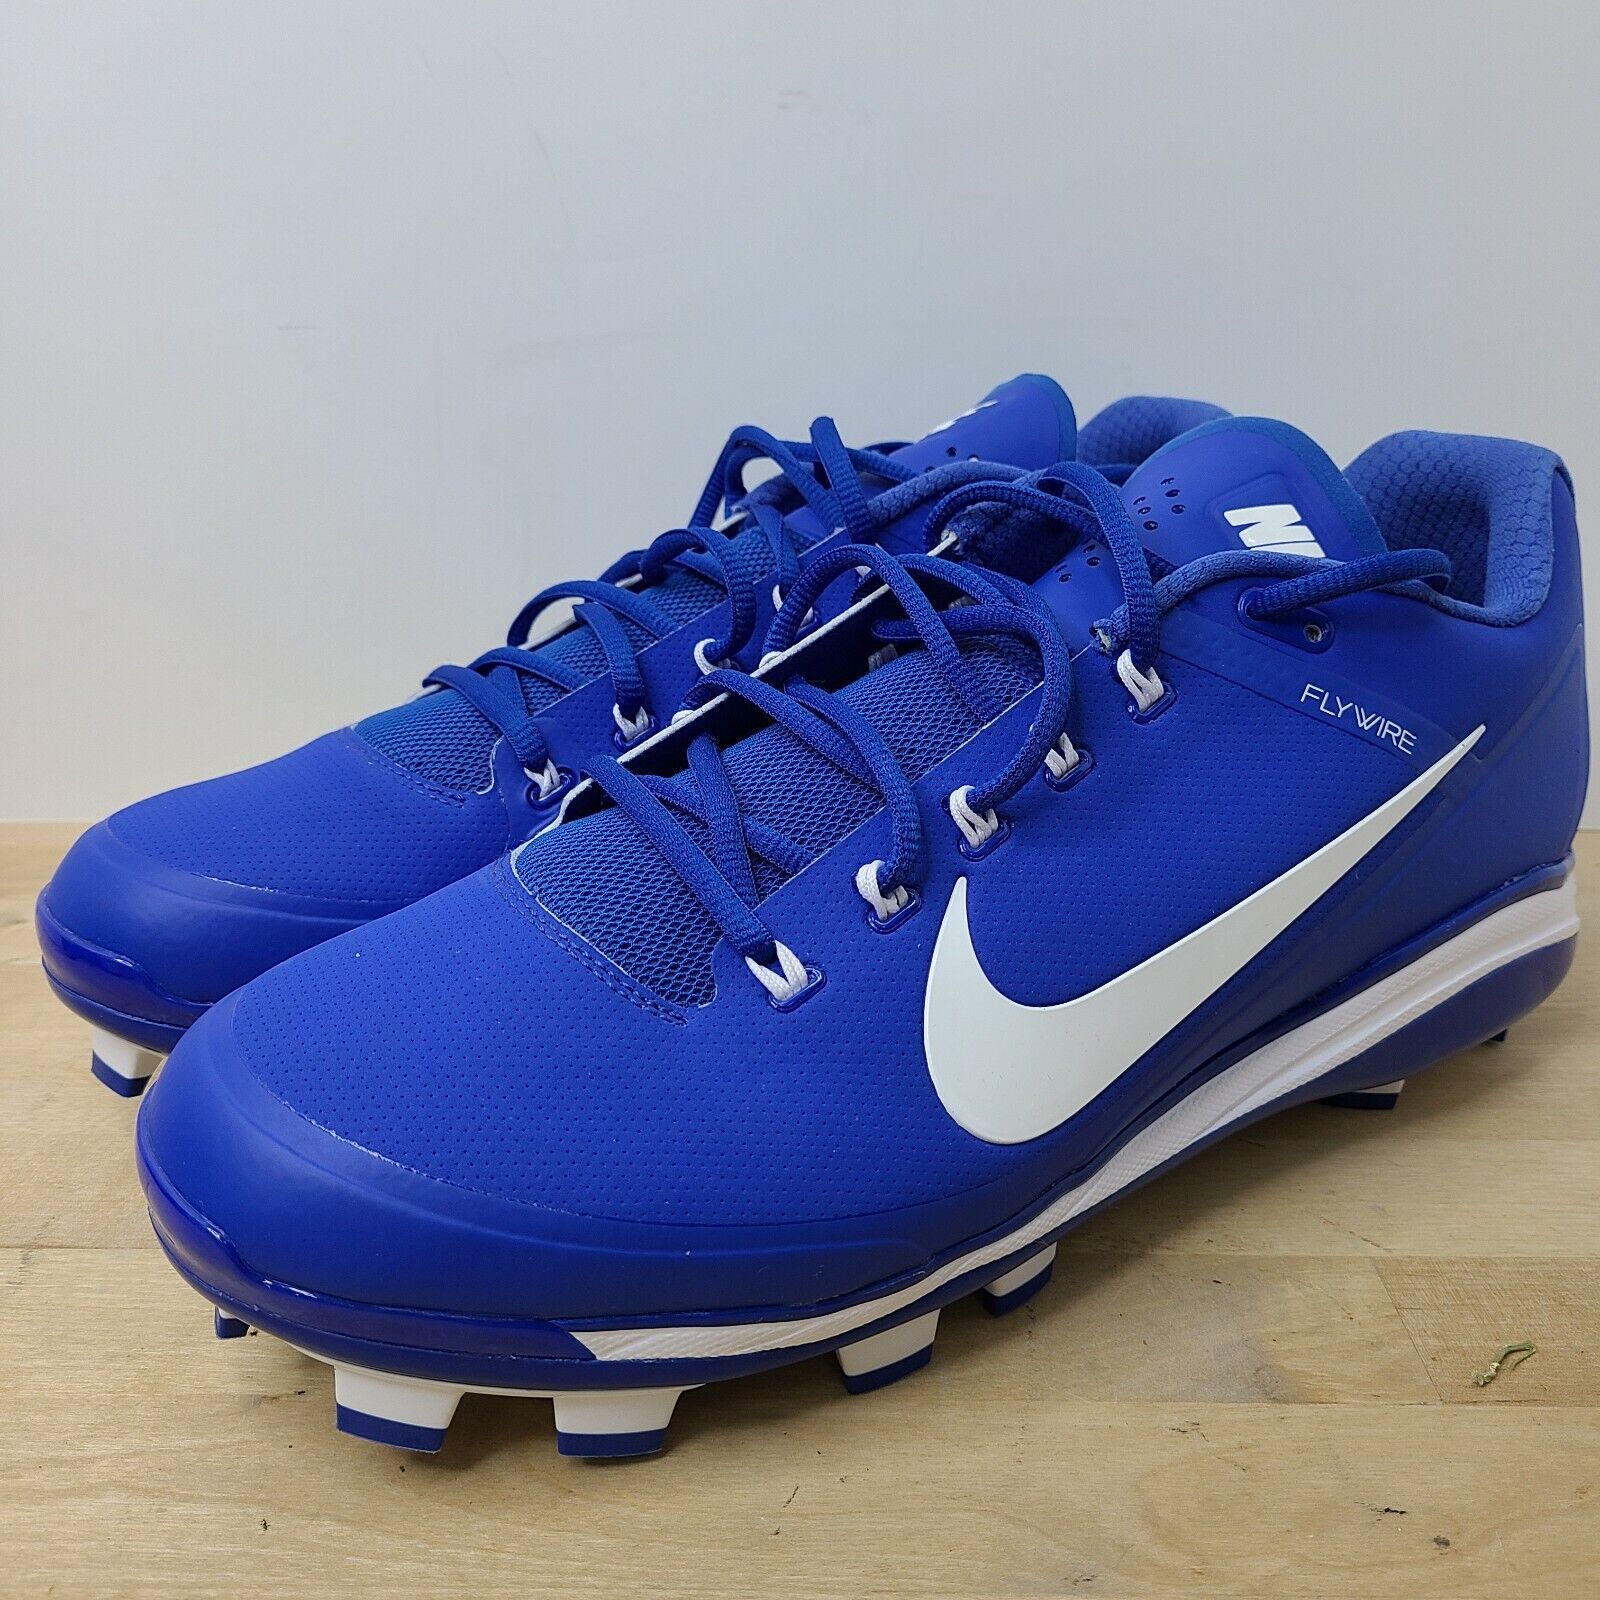 Omleiding Hoofdkwartier Kwadrant Nike Flywire Air Max Clipper Baseball Cleats Mens Size 13.5 Shoes Blue  Athletic | eBay